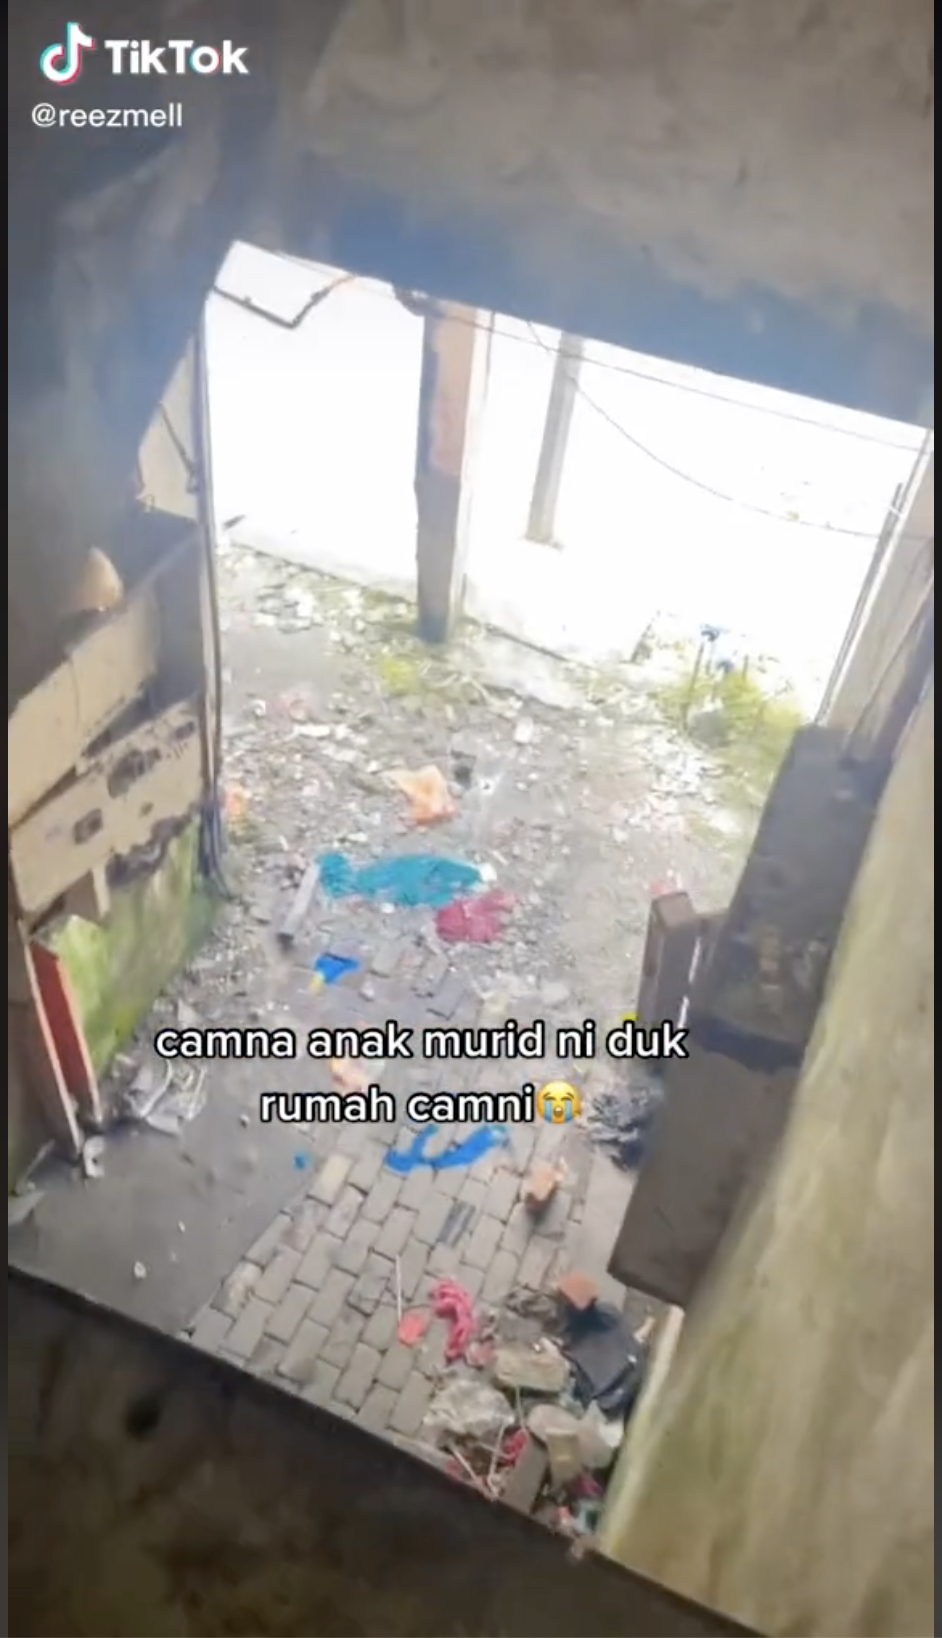 [video] teachers visited a student's house filled with rubbish, only to discover that she lost her mother recently